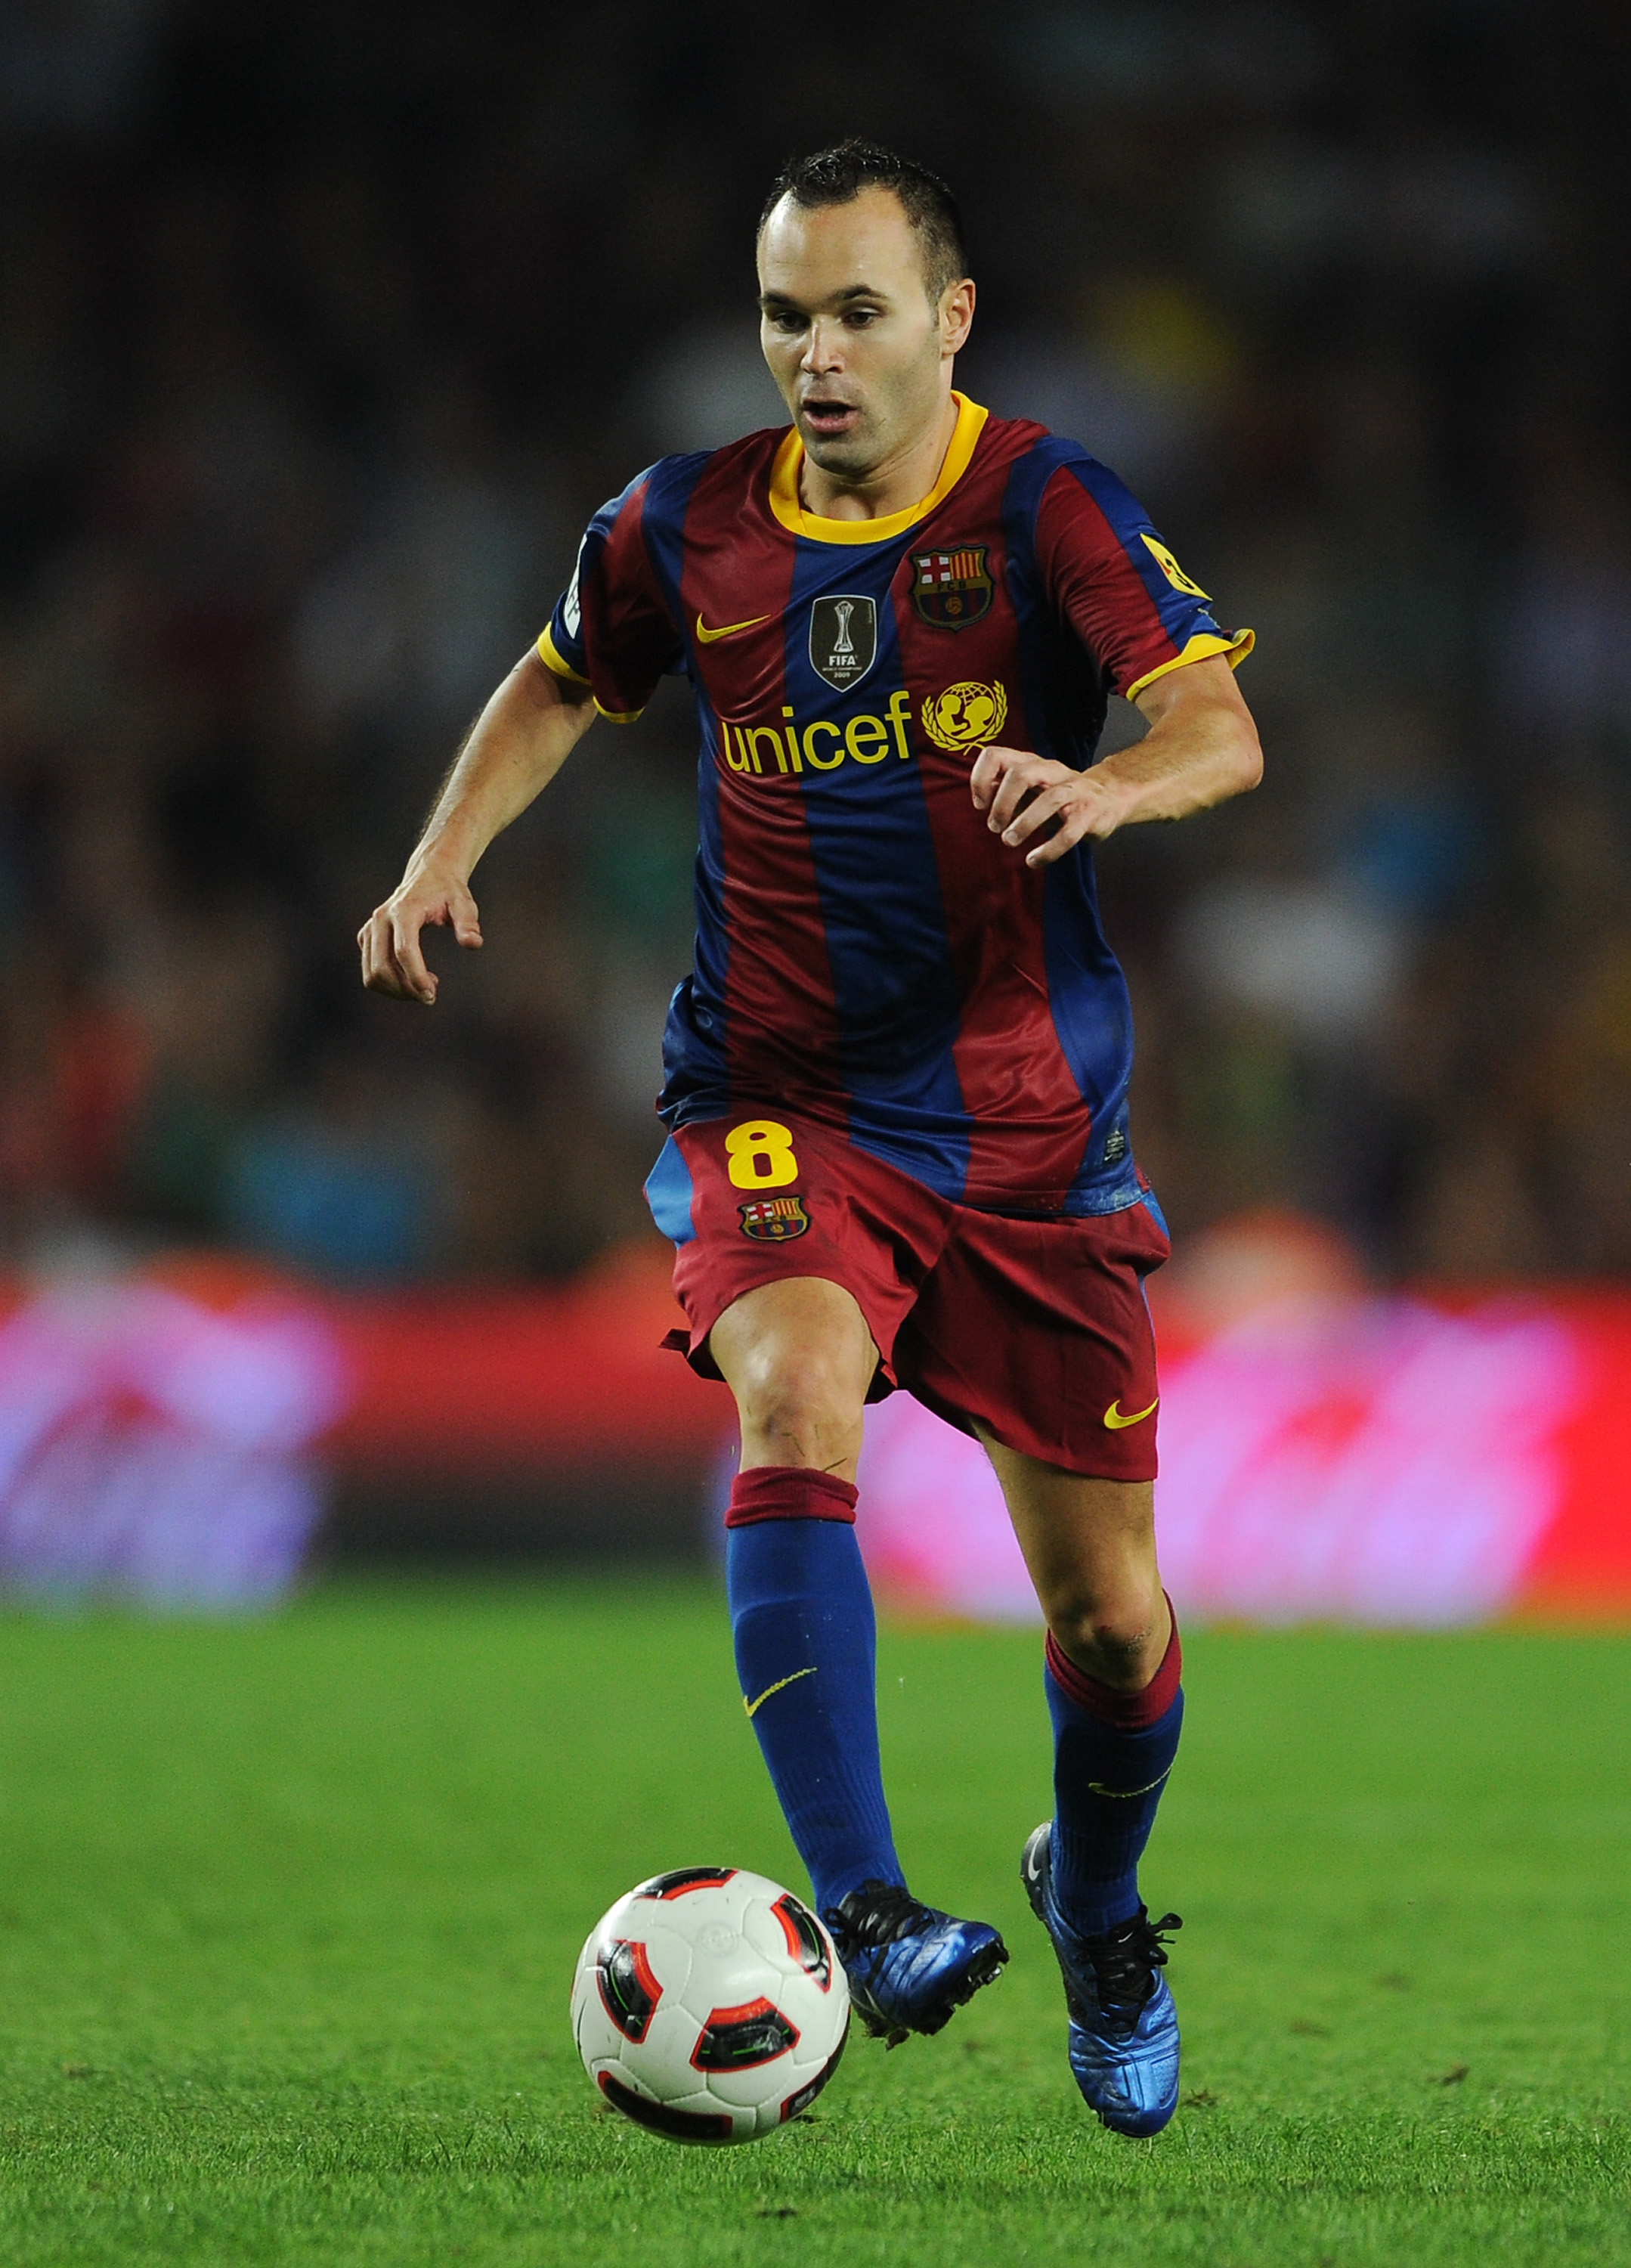 BARCELONA, SPAIN - OCTOBER 03:  Andres Iniesta of Barcelona controls the ball during the La Liga match between Barcelona and Mallorca at the Camp Nou stadium on October 3, 2010 in Barcelona, Spain. The match ended in a 1-1 draw.  (Photo by Jasper Juinen/G